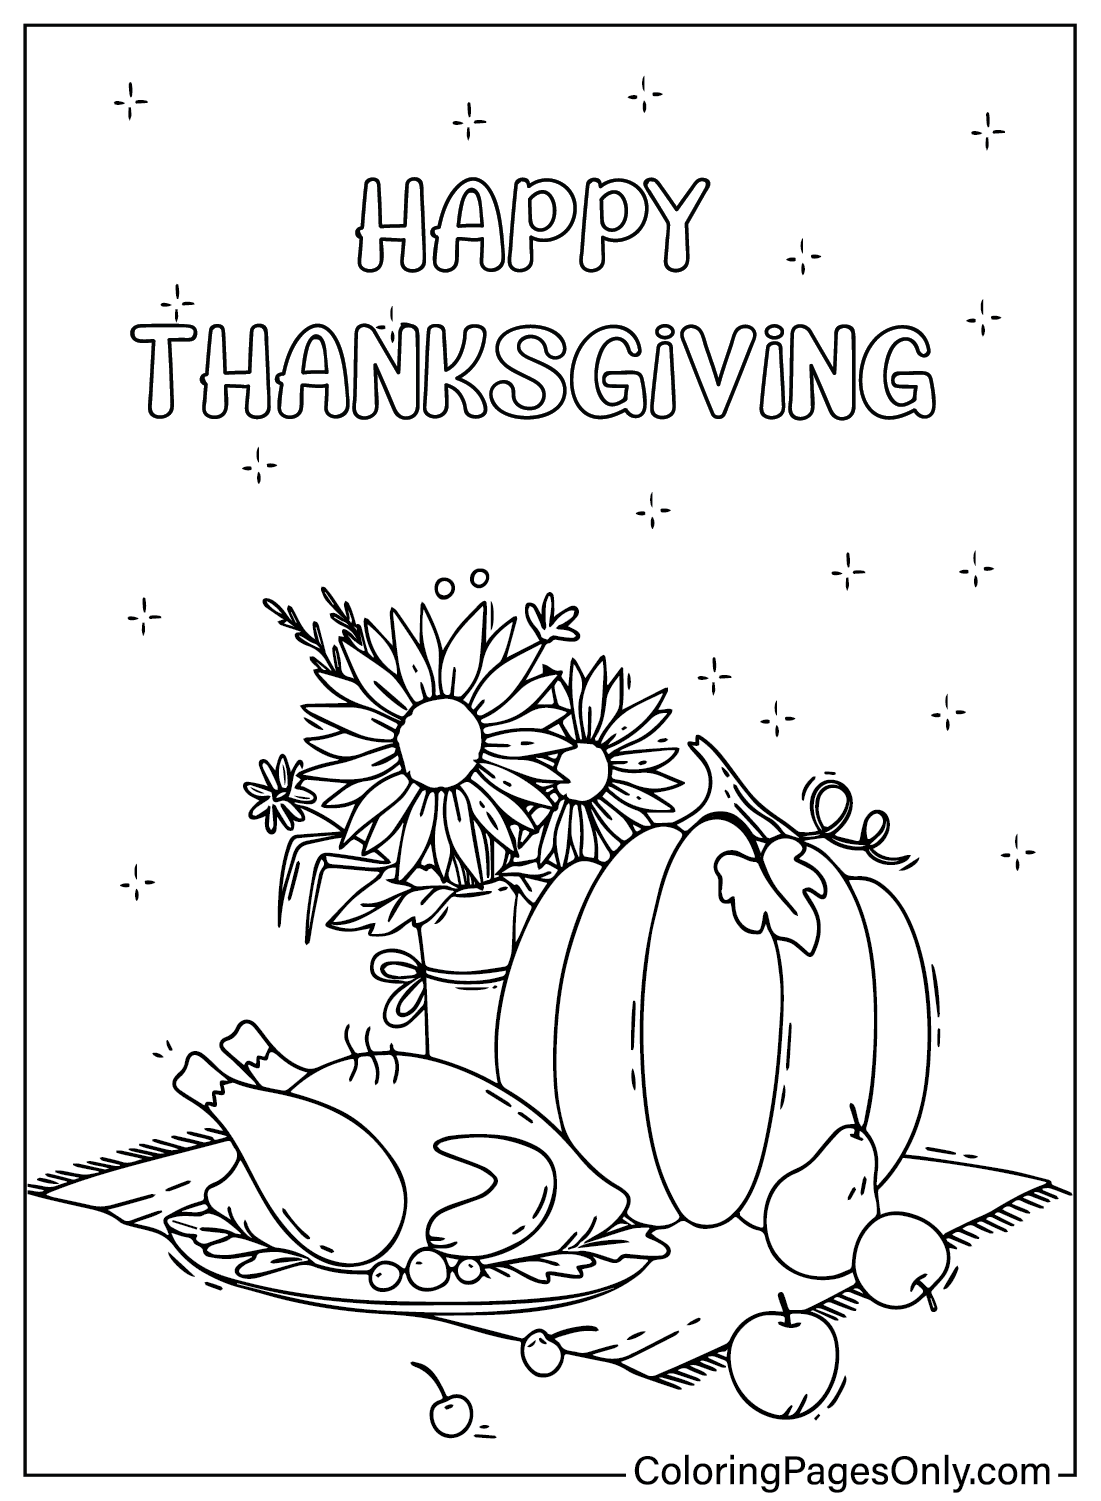 Happy Thanksgiving Coloring Page Free